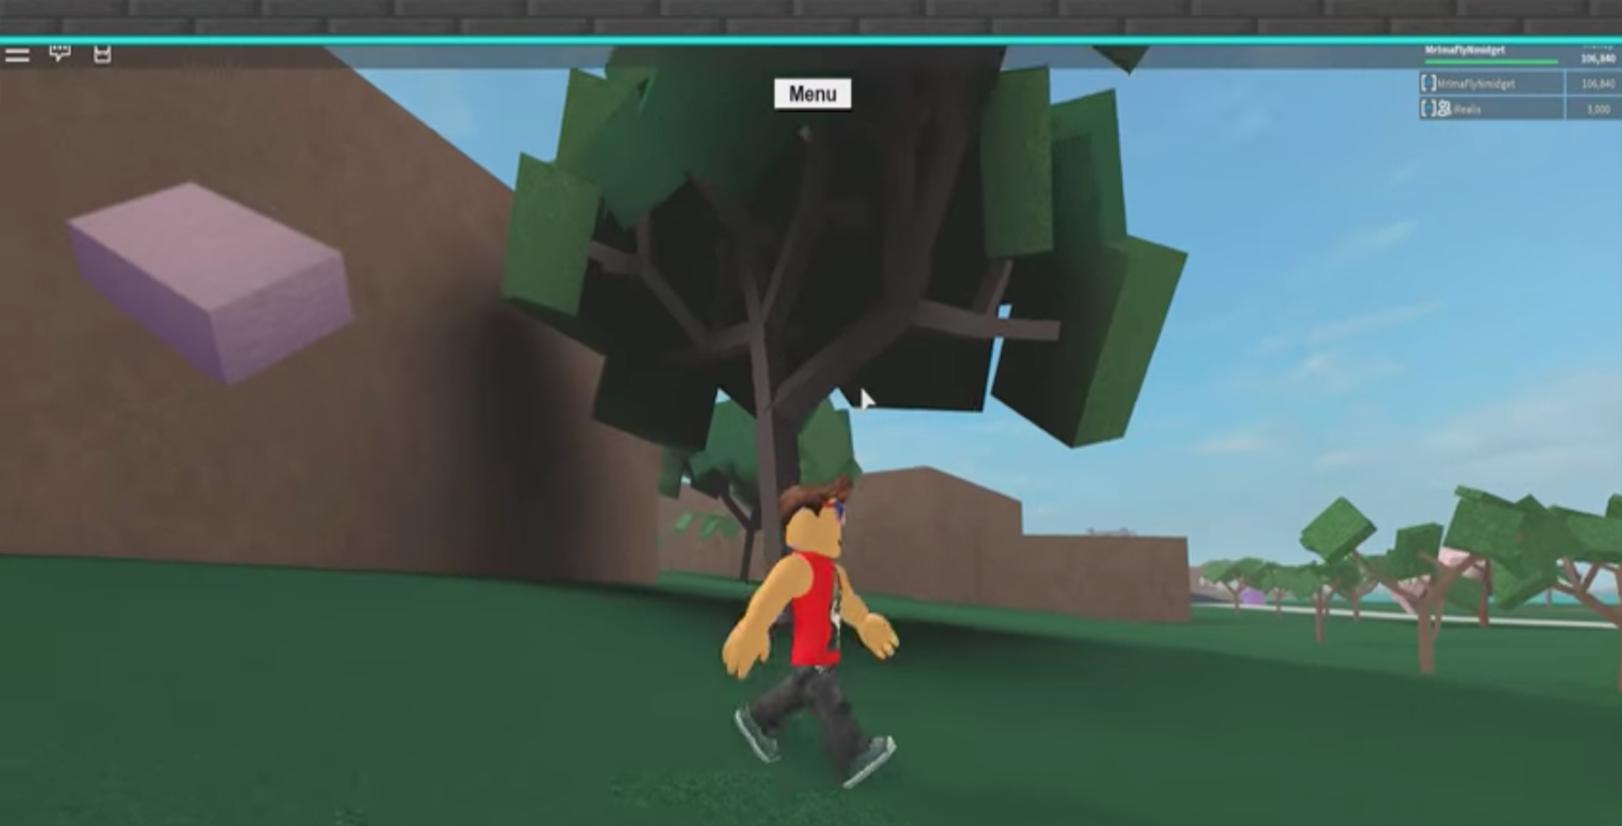 Money Glitch In Lumber Tycoon 2 For Roblox